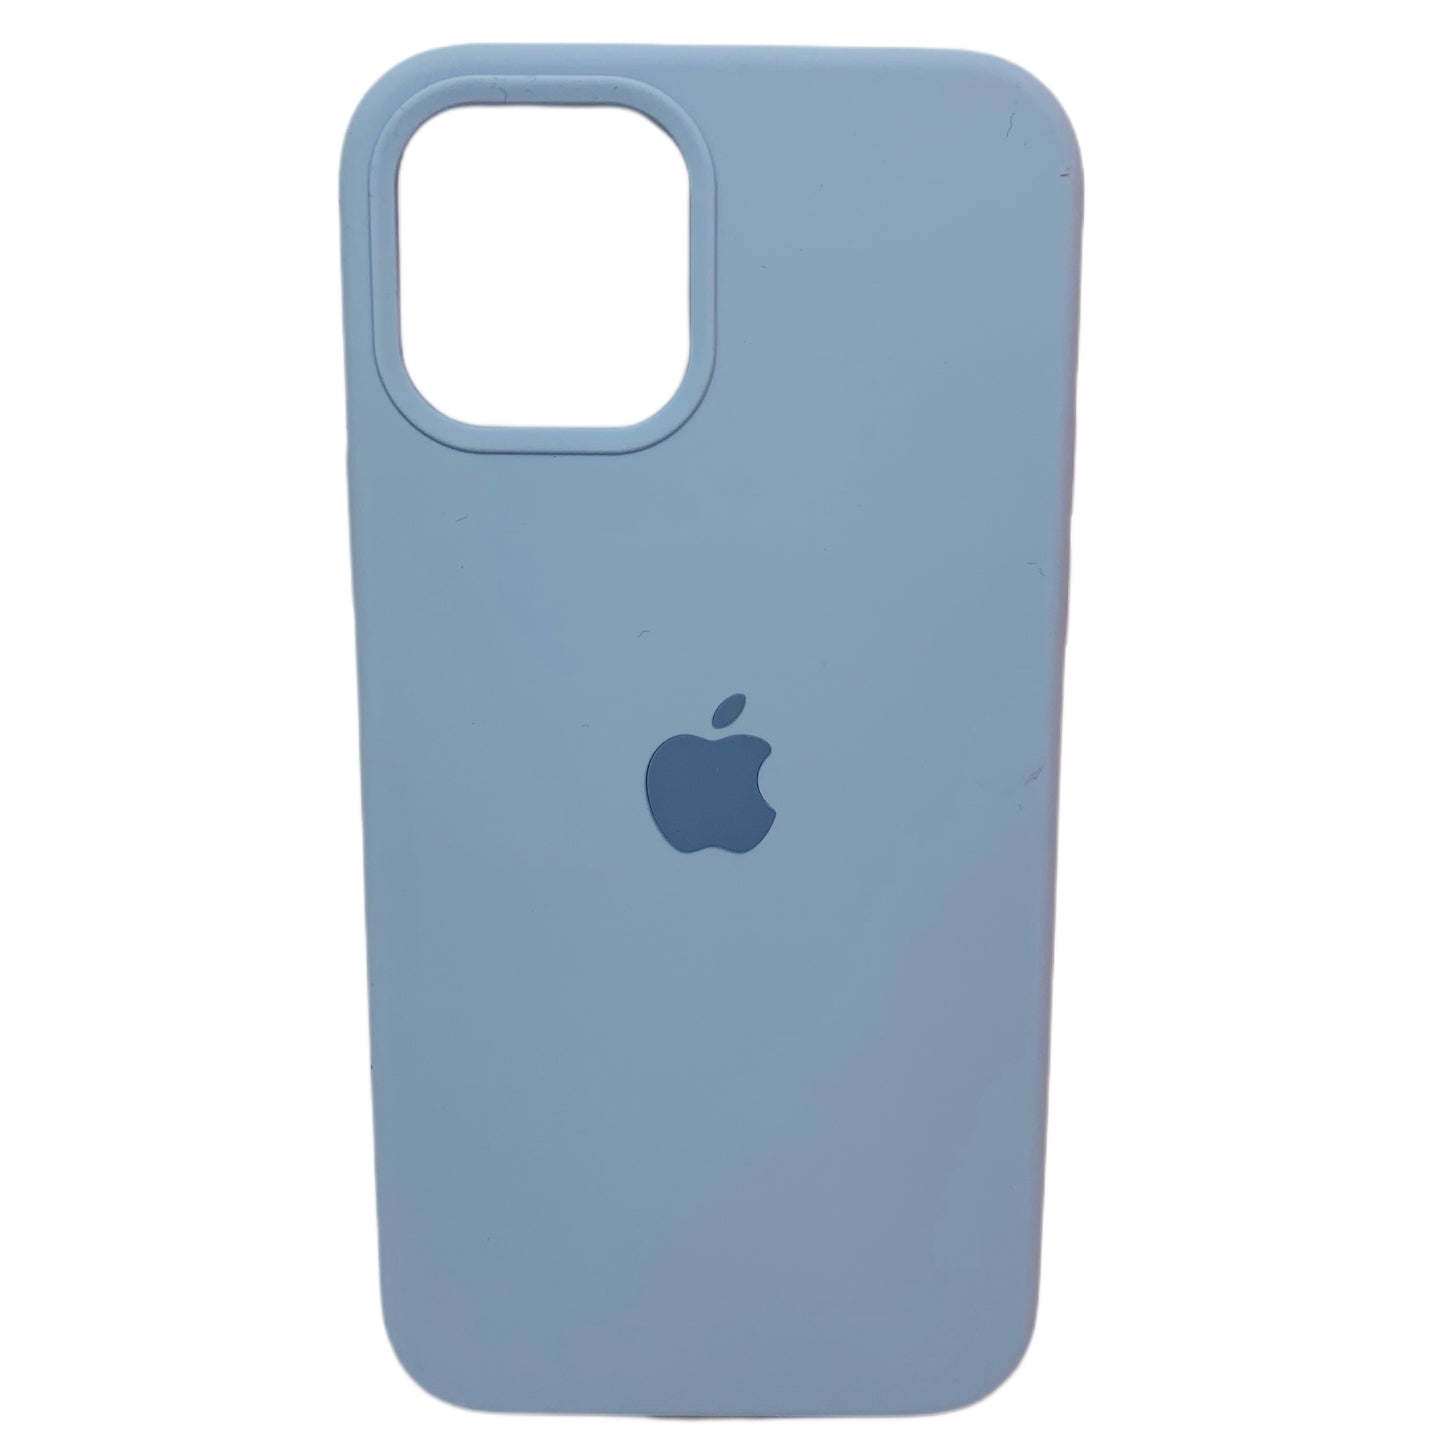 IPHONE 12/12 PRO PROTECTOR SILICON